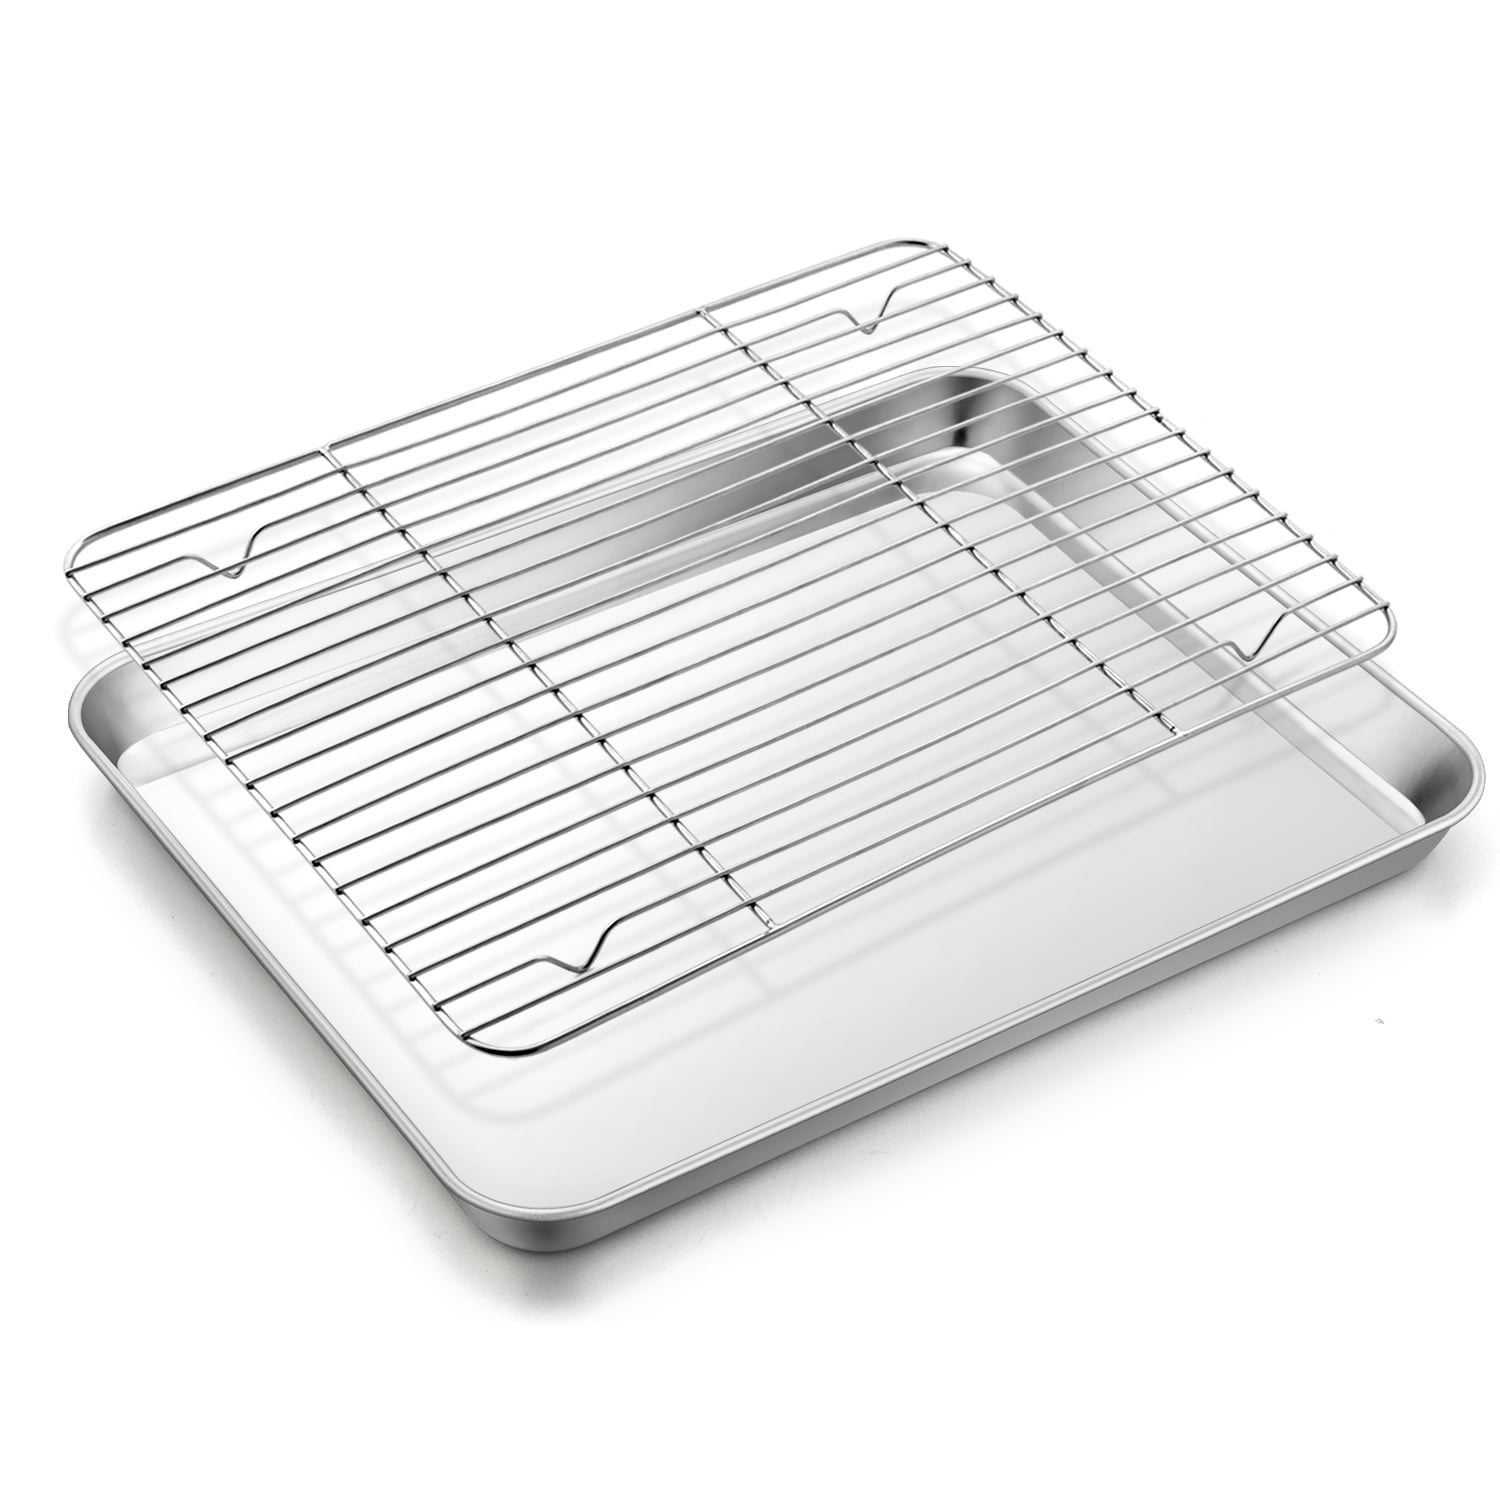 VeSteel Baking Sheets and Racks Set, Stainless Steel Rectangle Baking Sheet  Oven Tray and Cooling Grid Rack for Cookies Meats, Size 16 x 12 x 1 Inch 